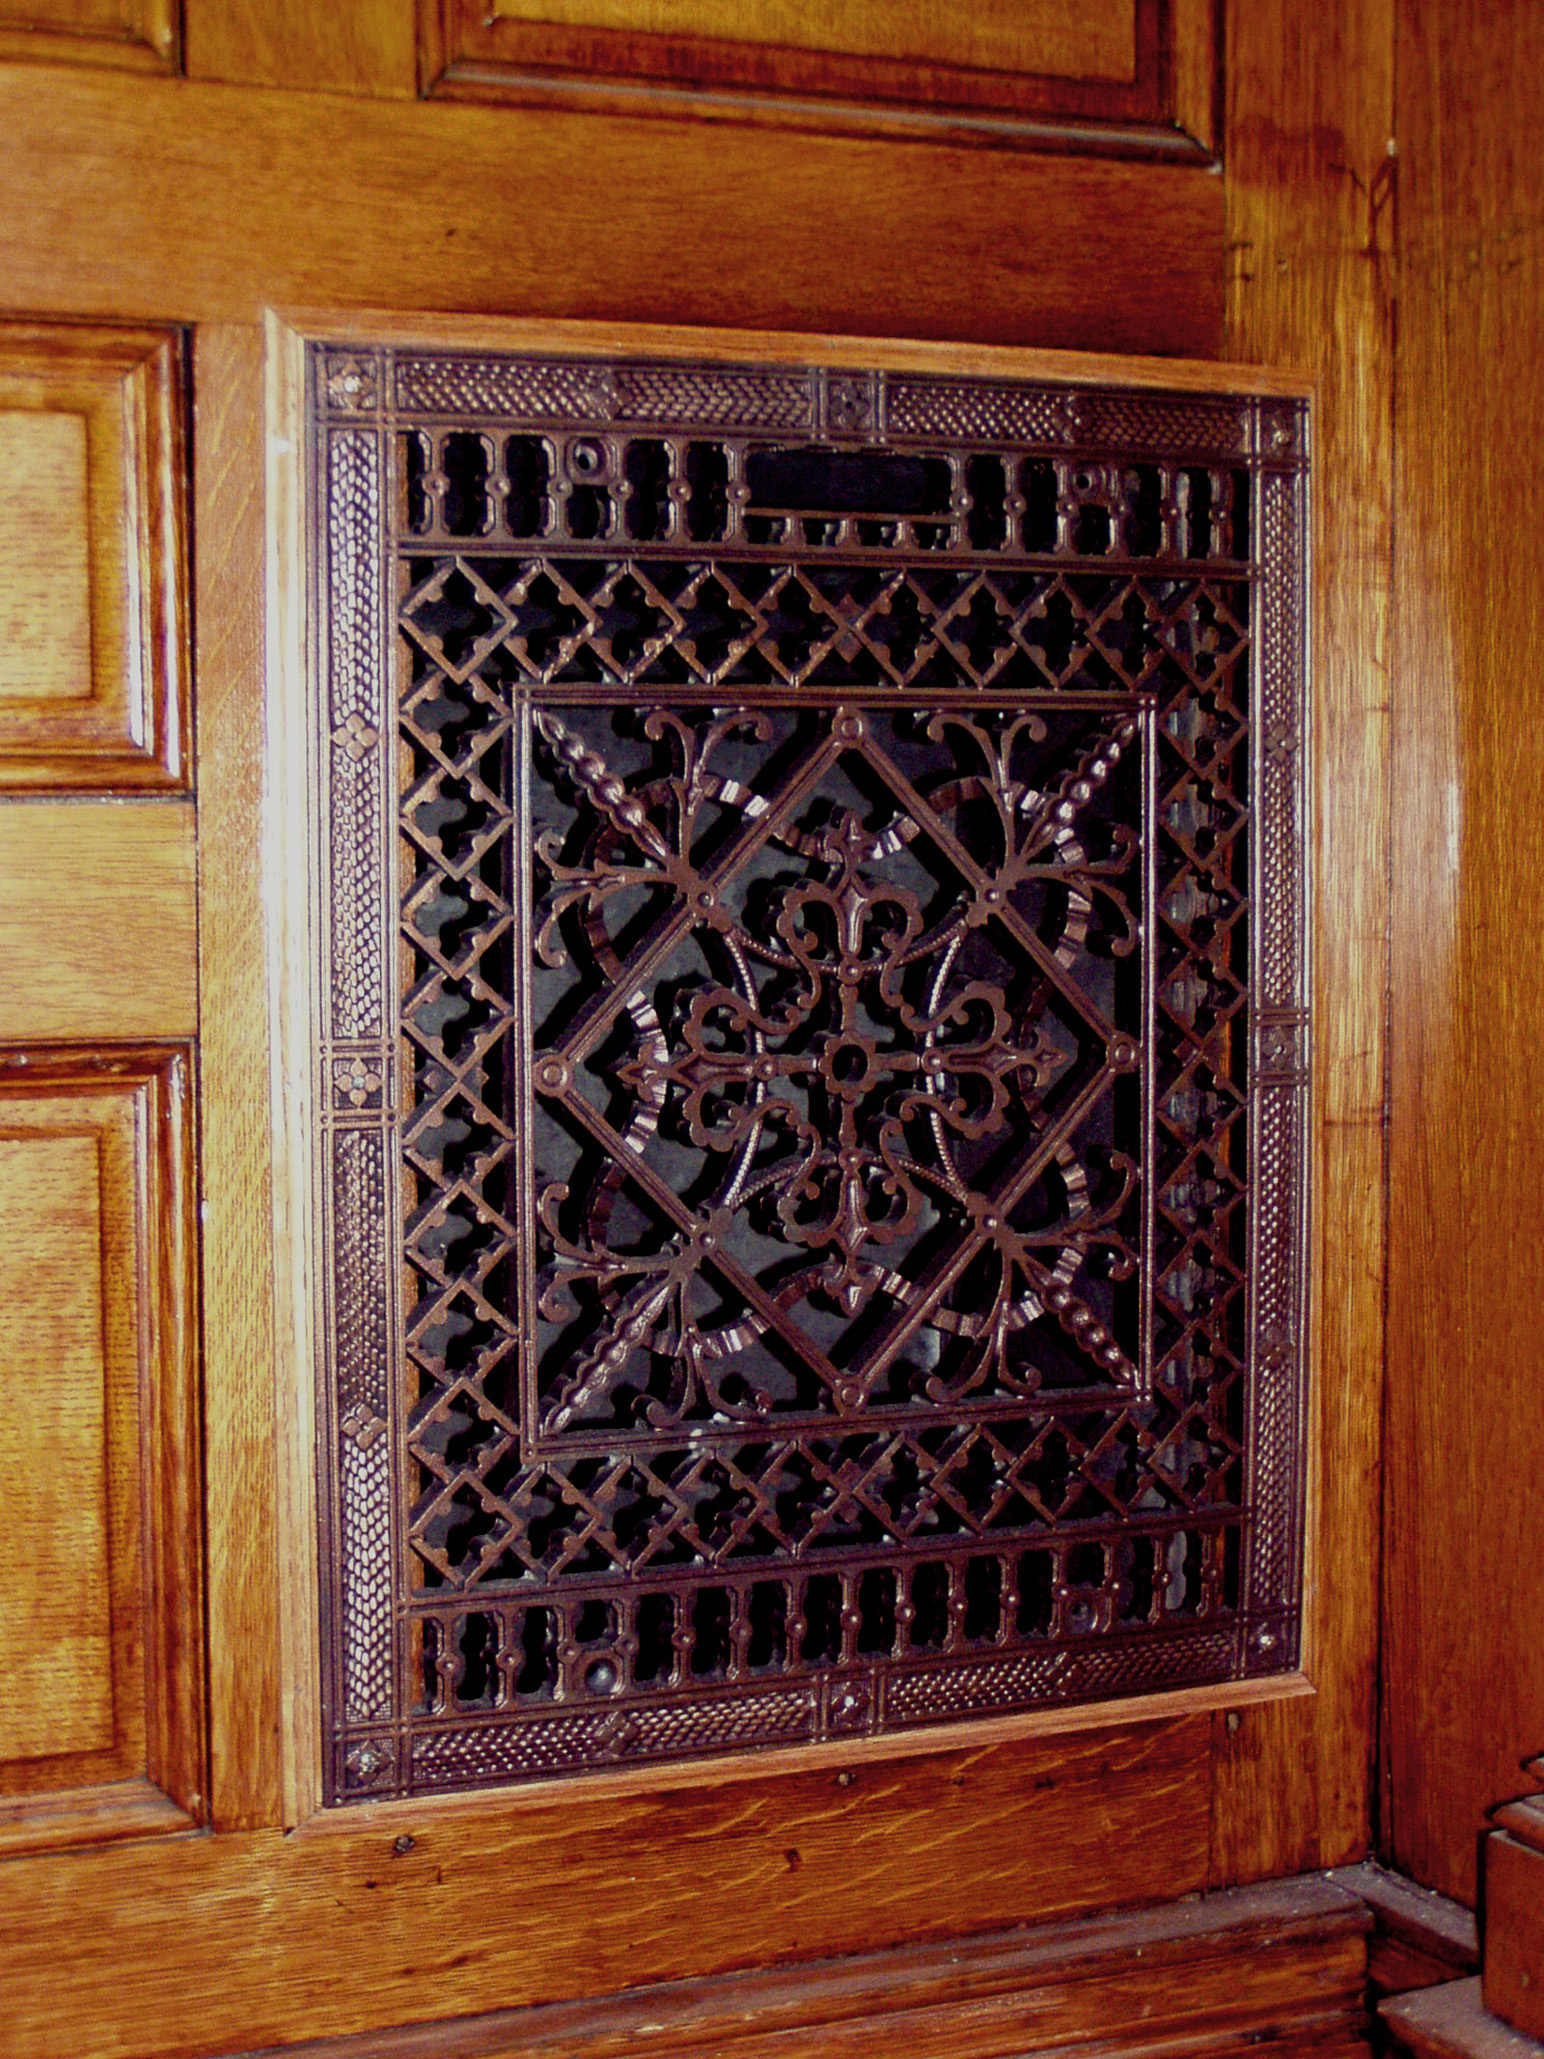 Arts and Crafts decorative vent cover with whole for antique control